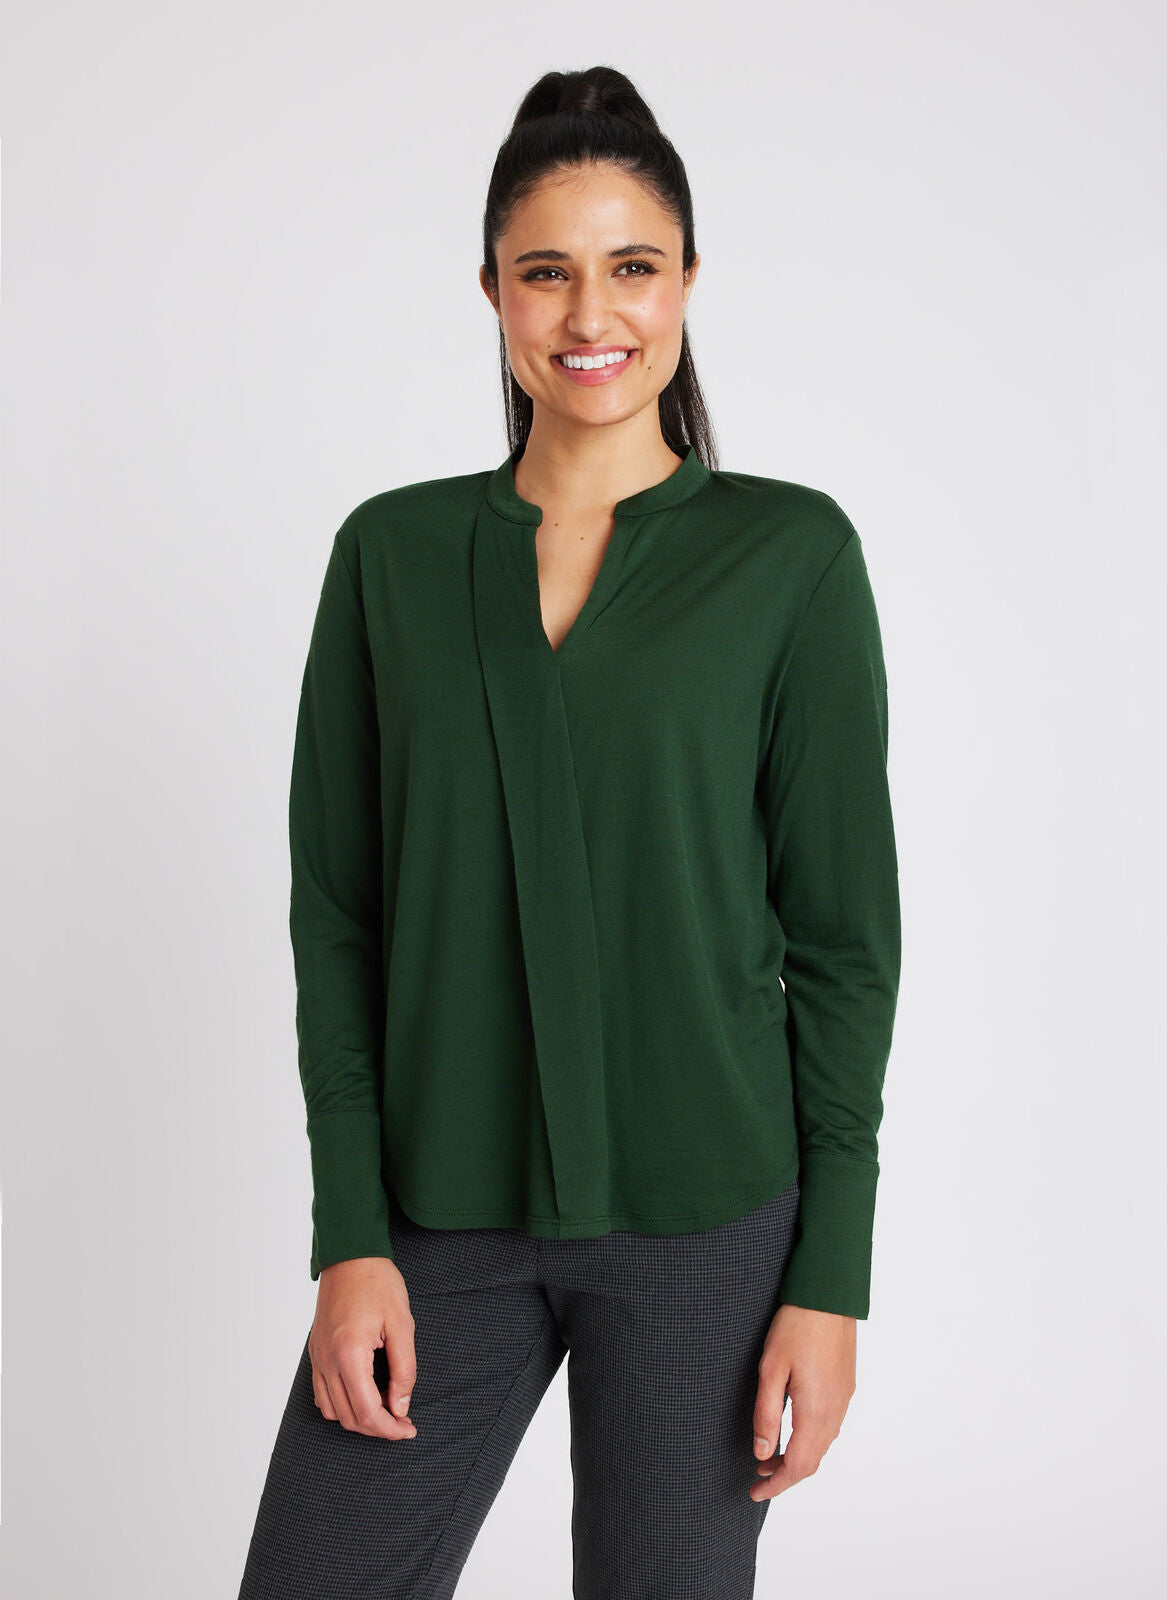 Merino Jersey Blouse | Women's Shirts and Blouses – Kit and Ace